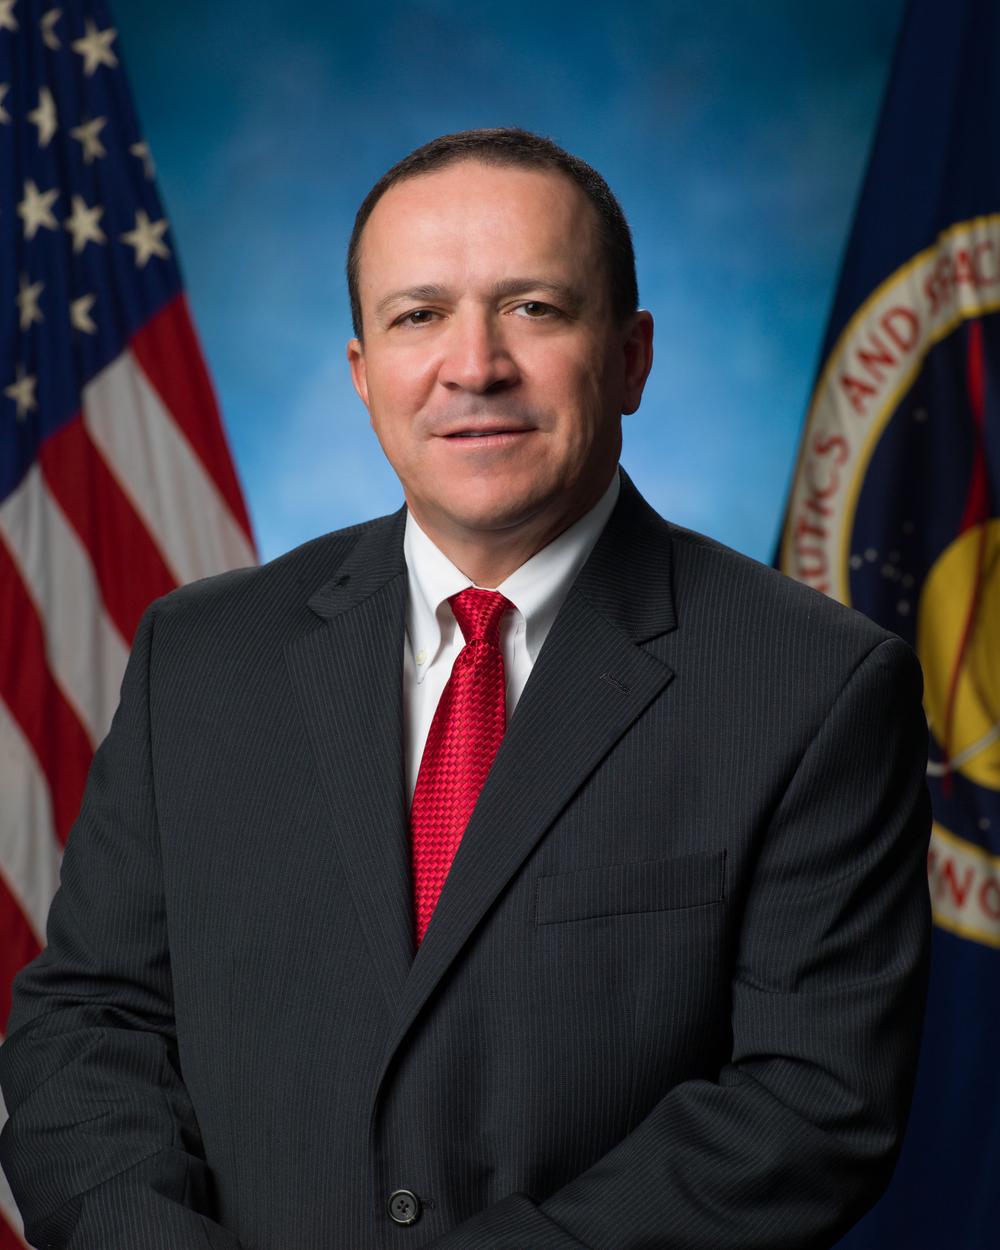 A person wearing a black suit and red tie smiles in front of a blue background and a U.S. flag (left) and NASA flag (right).